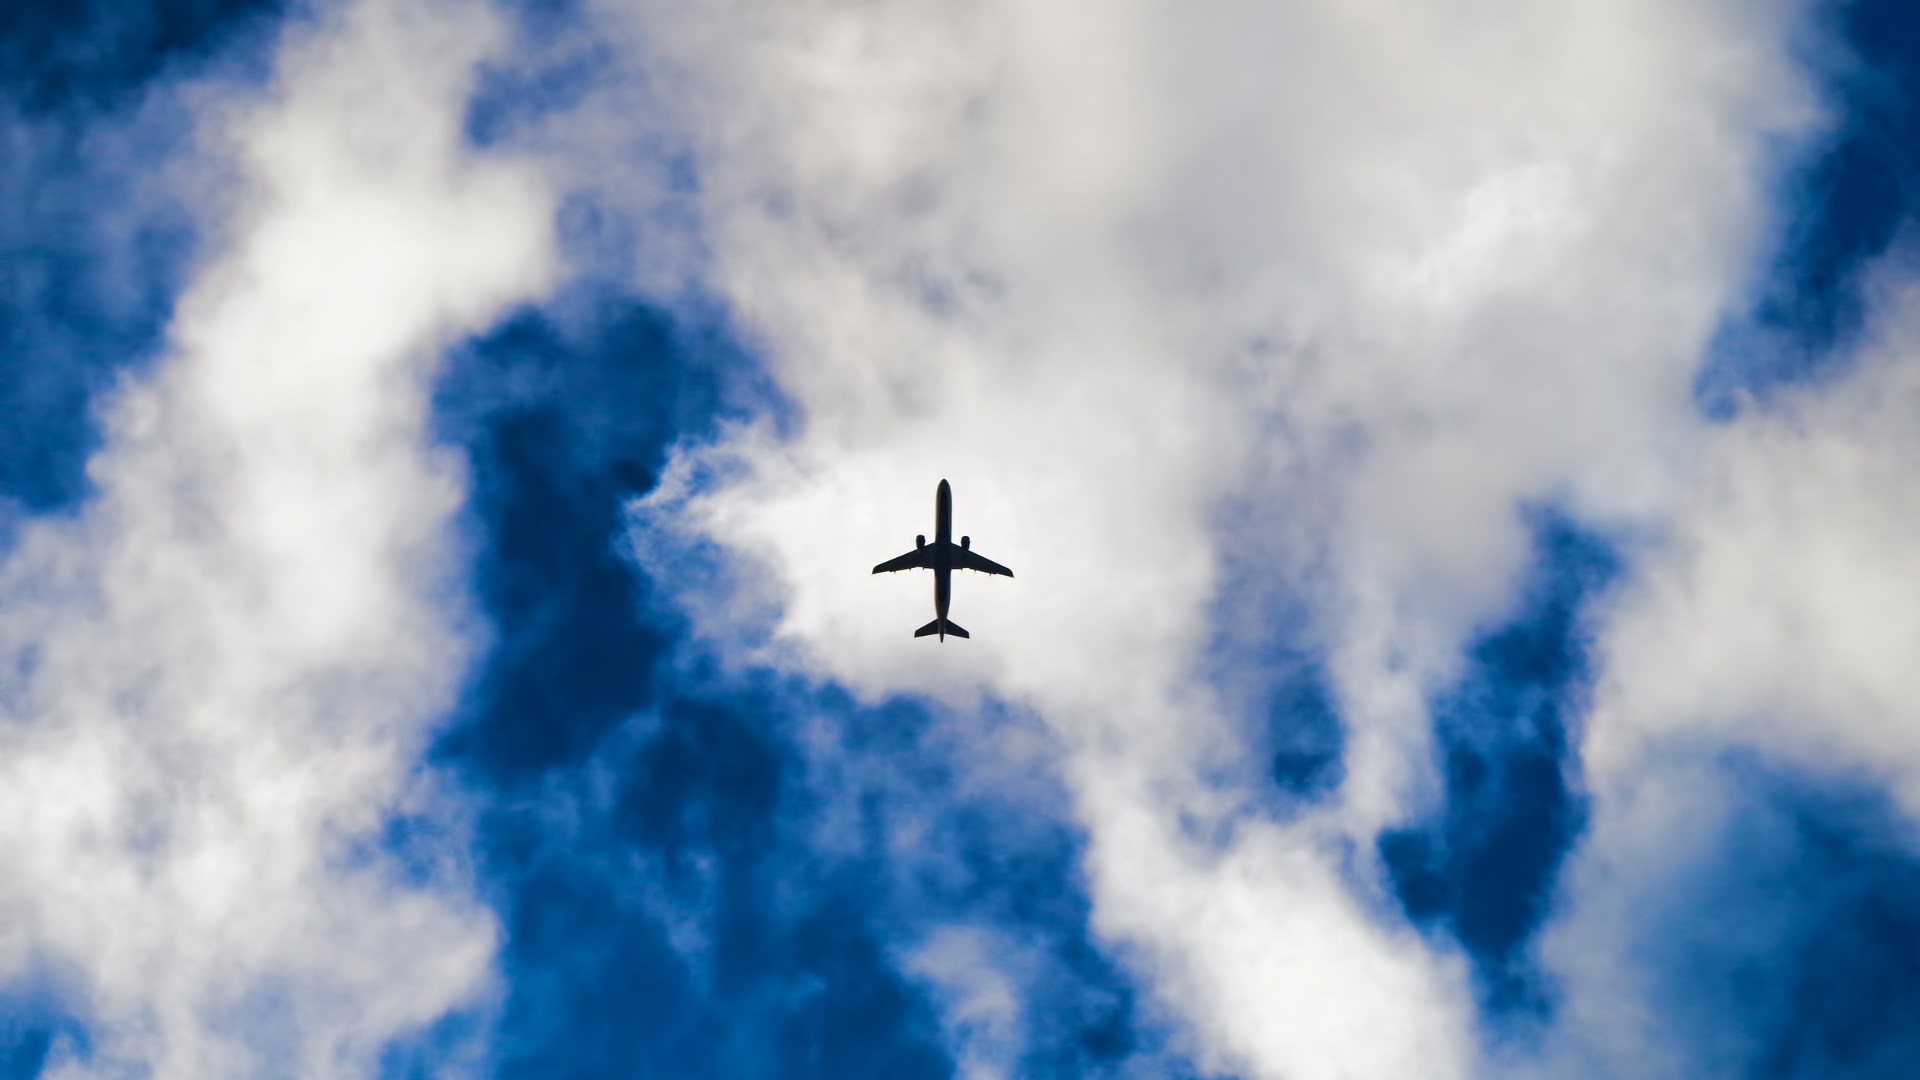 Image of plane in cloudy sky